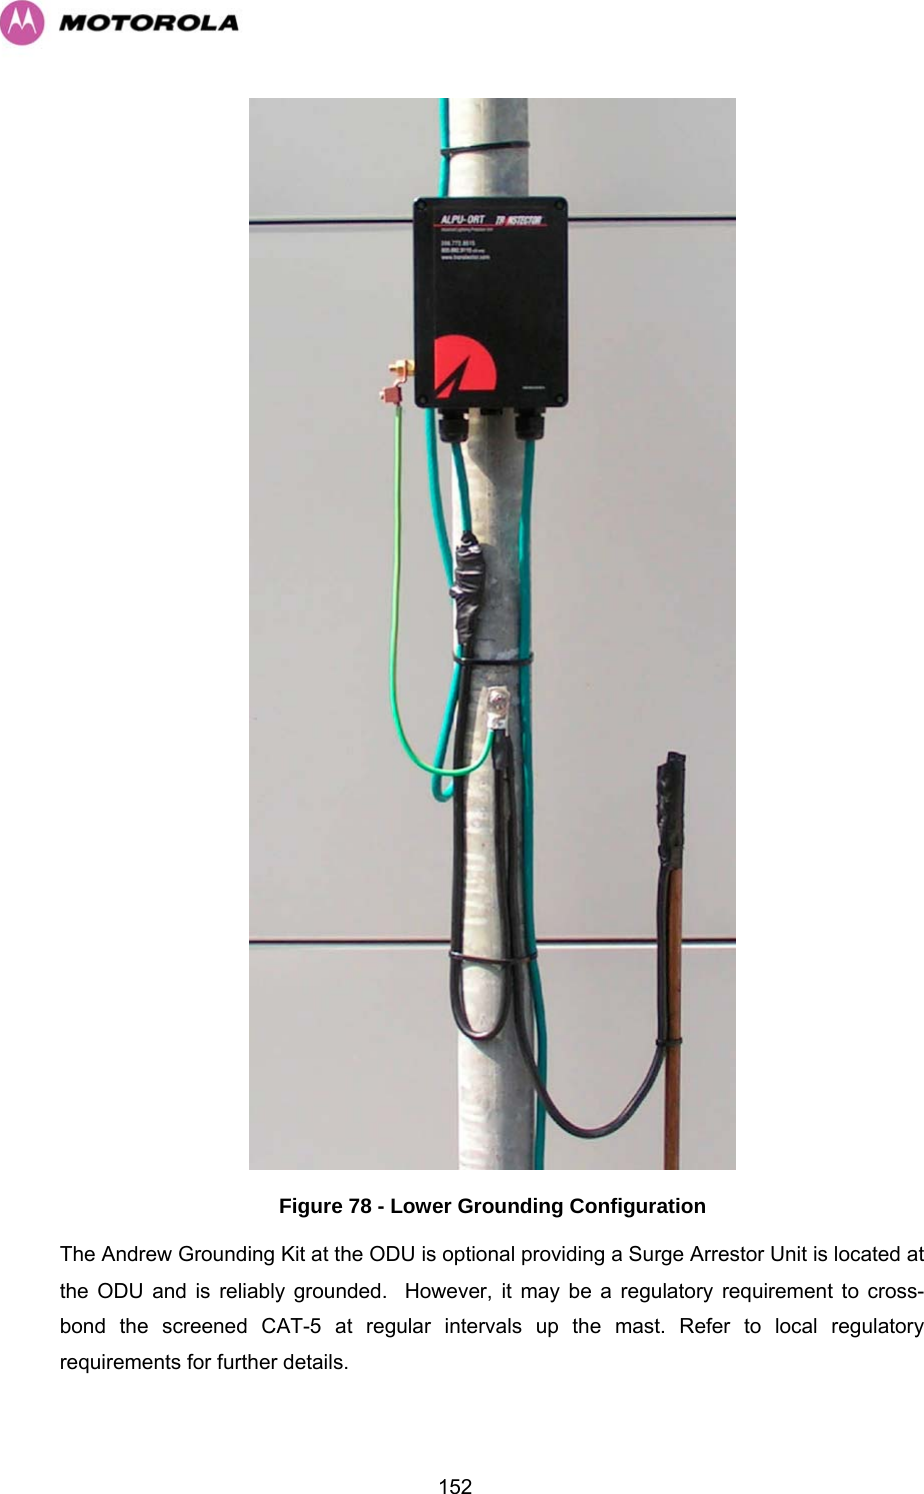   152 Figure 78 - Lower Grounding Configuration The Andrew Grounding Kit at the ODU is optional providing a Surge Arrestor Unit is located at the ODU and is reliably grounded.  However, it may be a regulatory requirement to cross-bond the screened CAT-5 at regular intervals up the mast. Refer to local regulatory requirements for further details. 